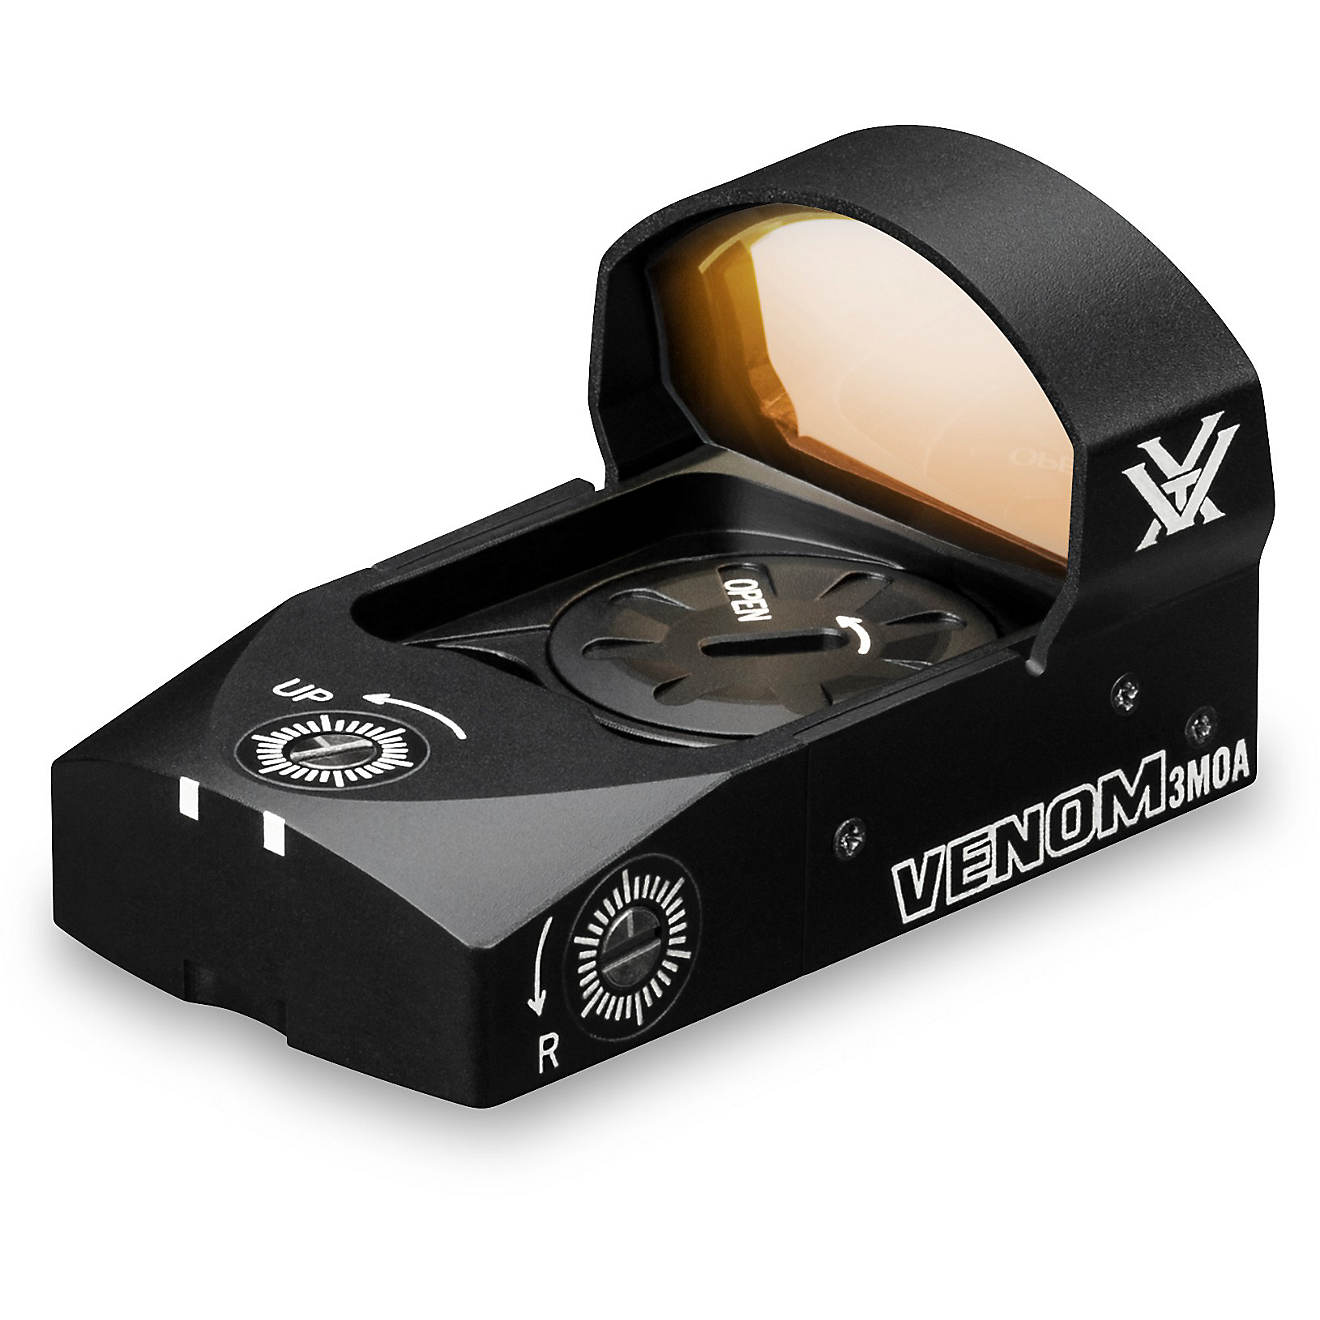 Vortex Venom Top Load 1x26.5mm 3 MOA Red Dot Sight, CR1632 Battery, Black(EMAIL TO SEE OUT BEST PRICE)